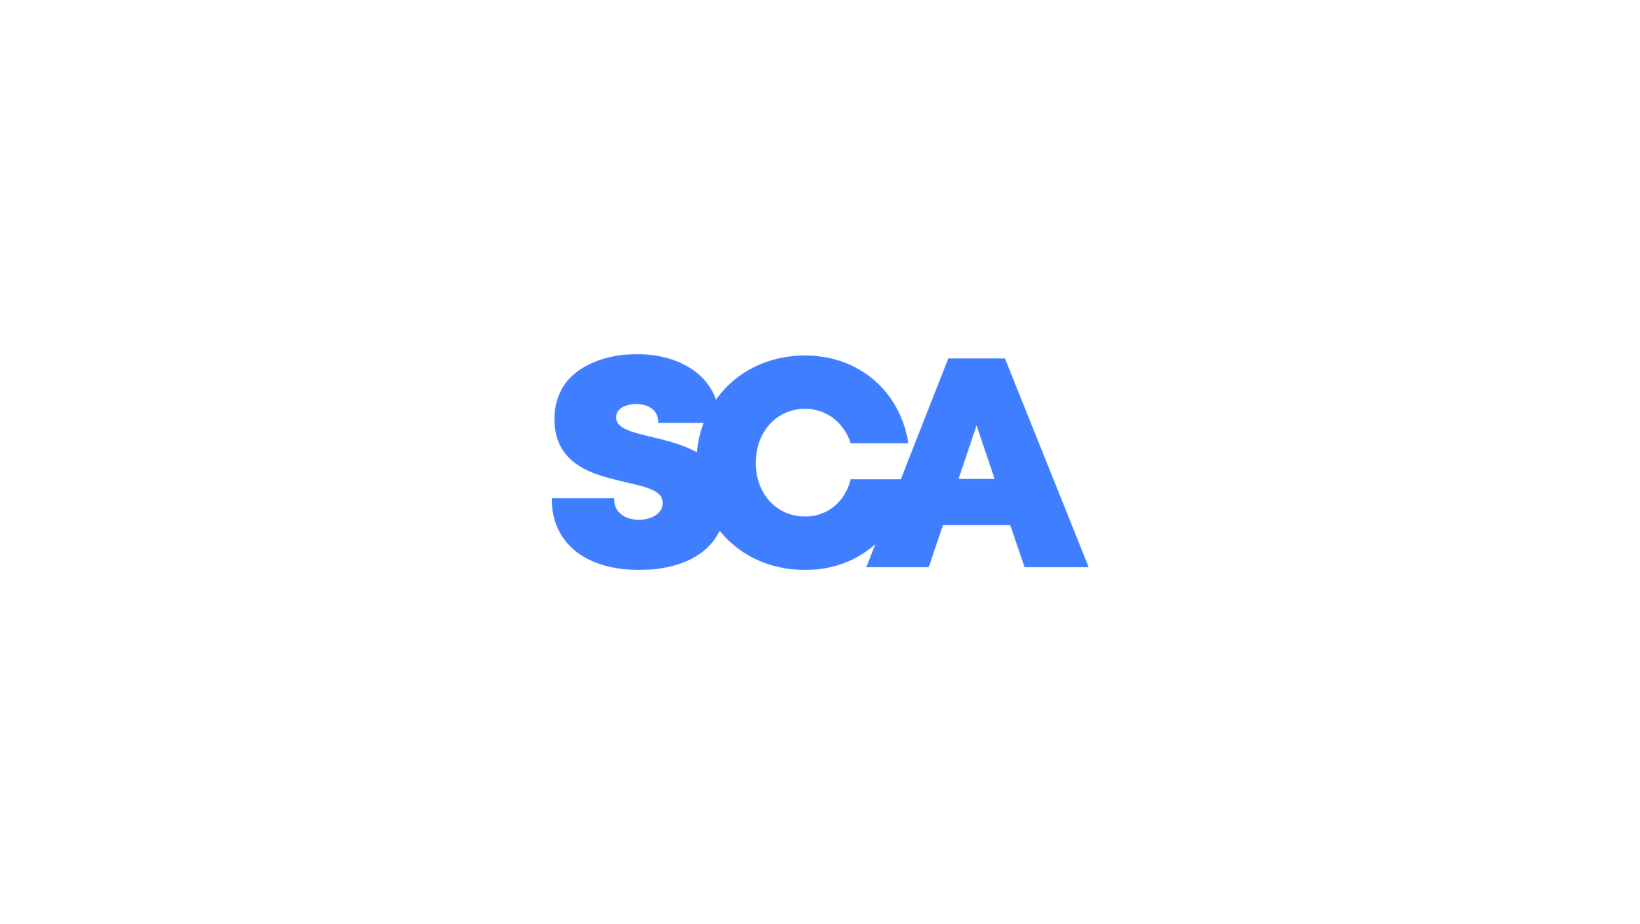 SCA becomes an investor in Frequency